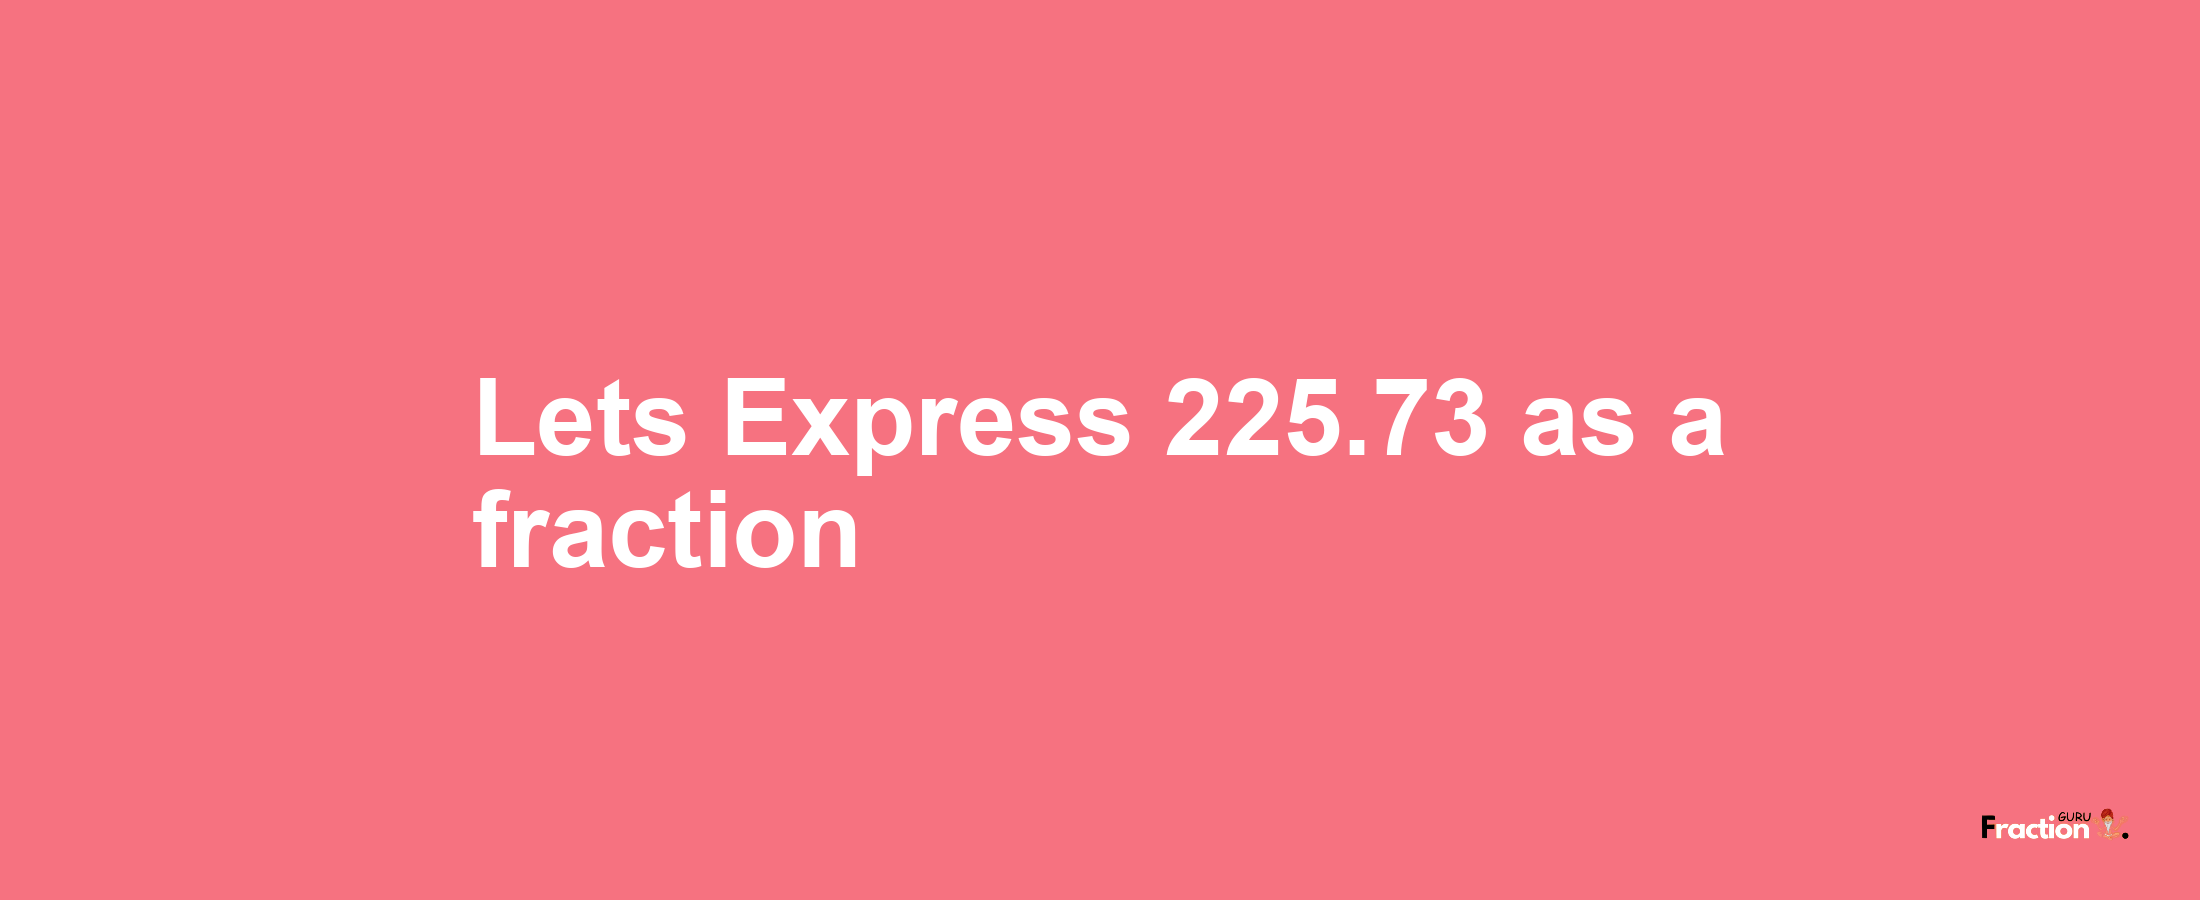 Lets Express 225.73 as afraction